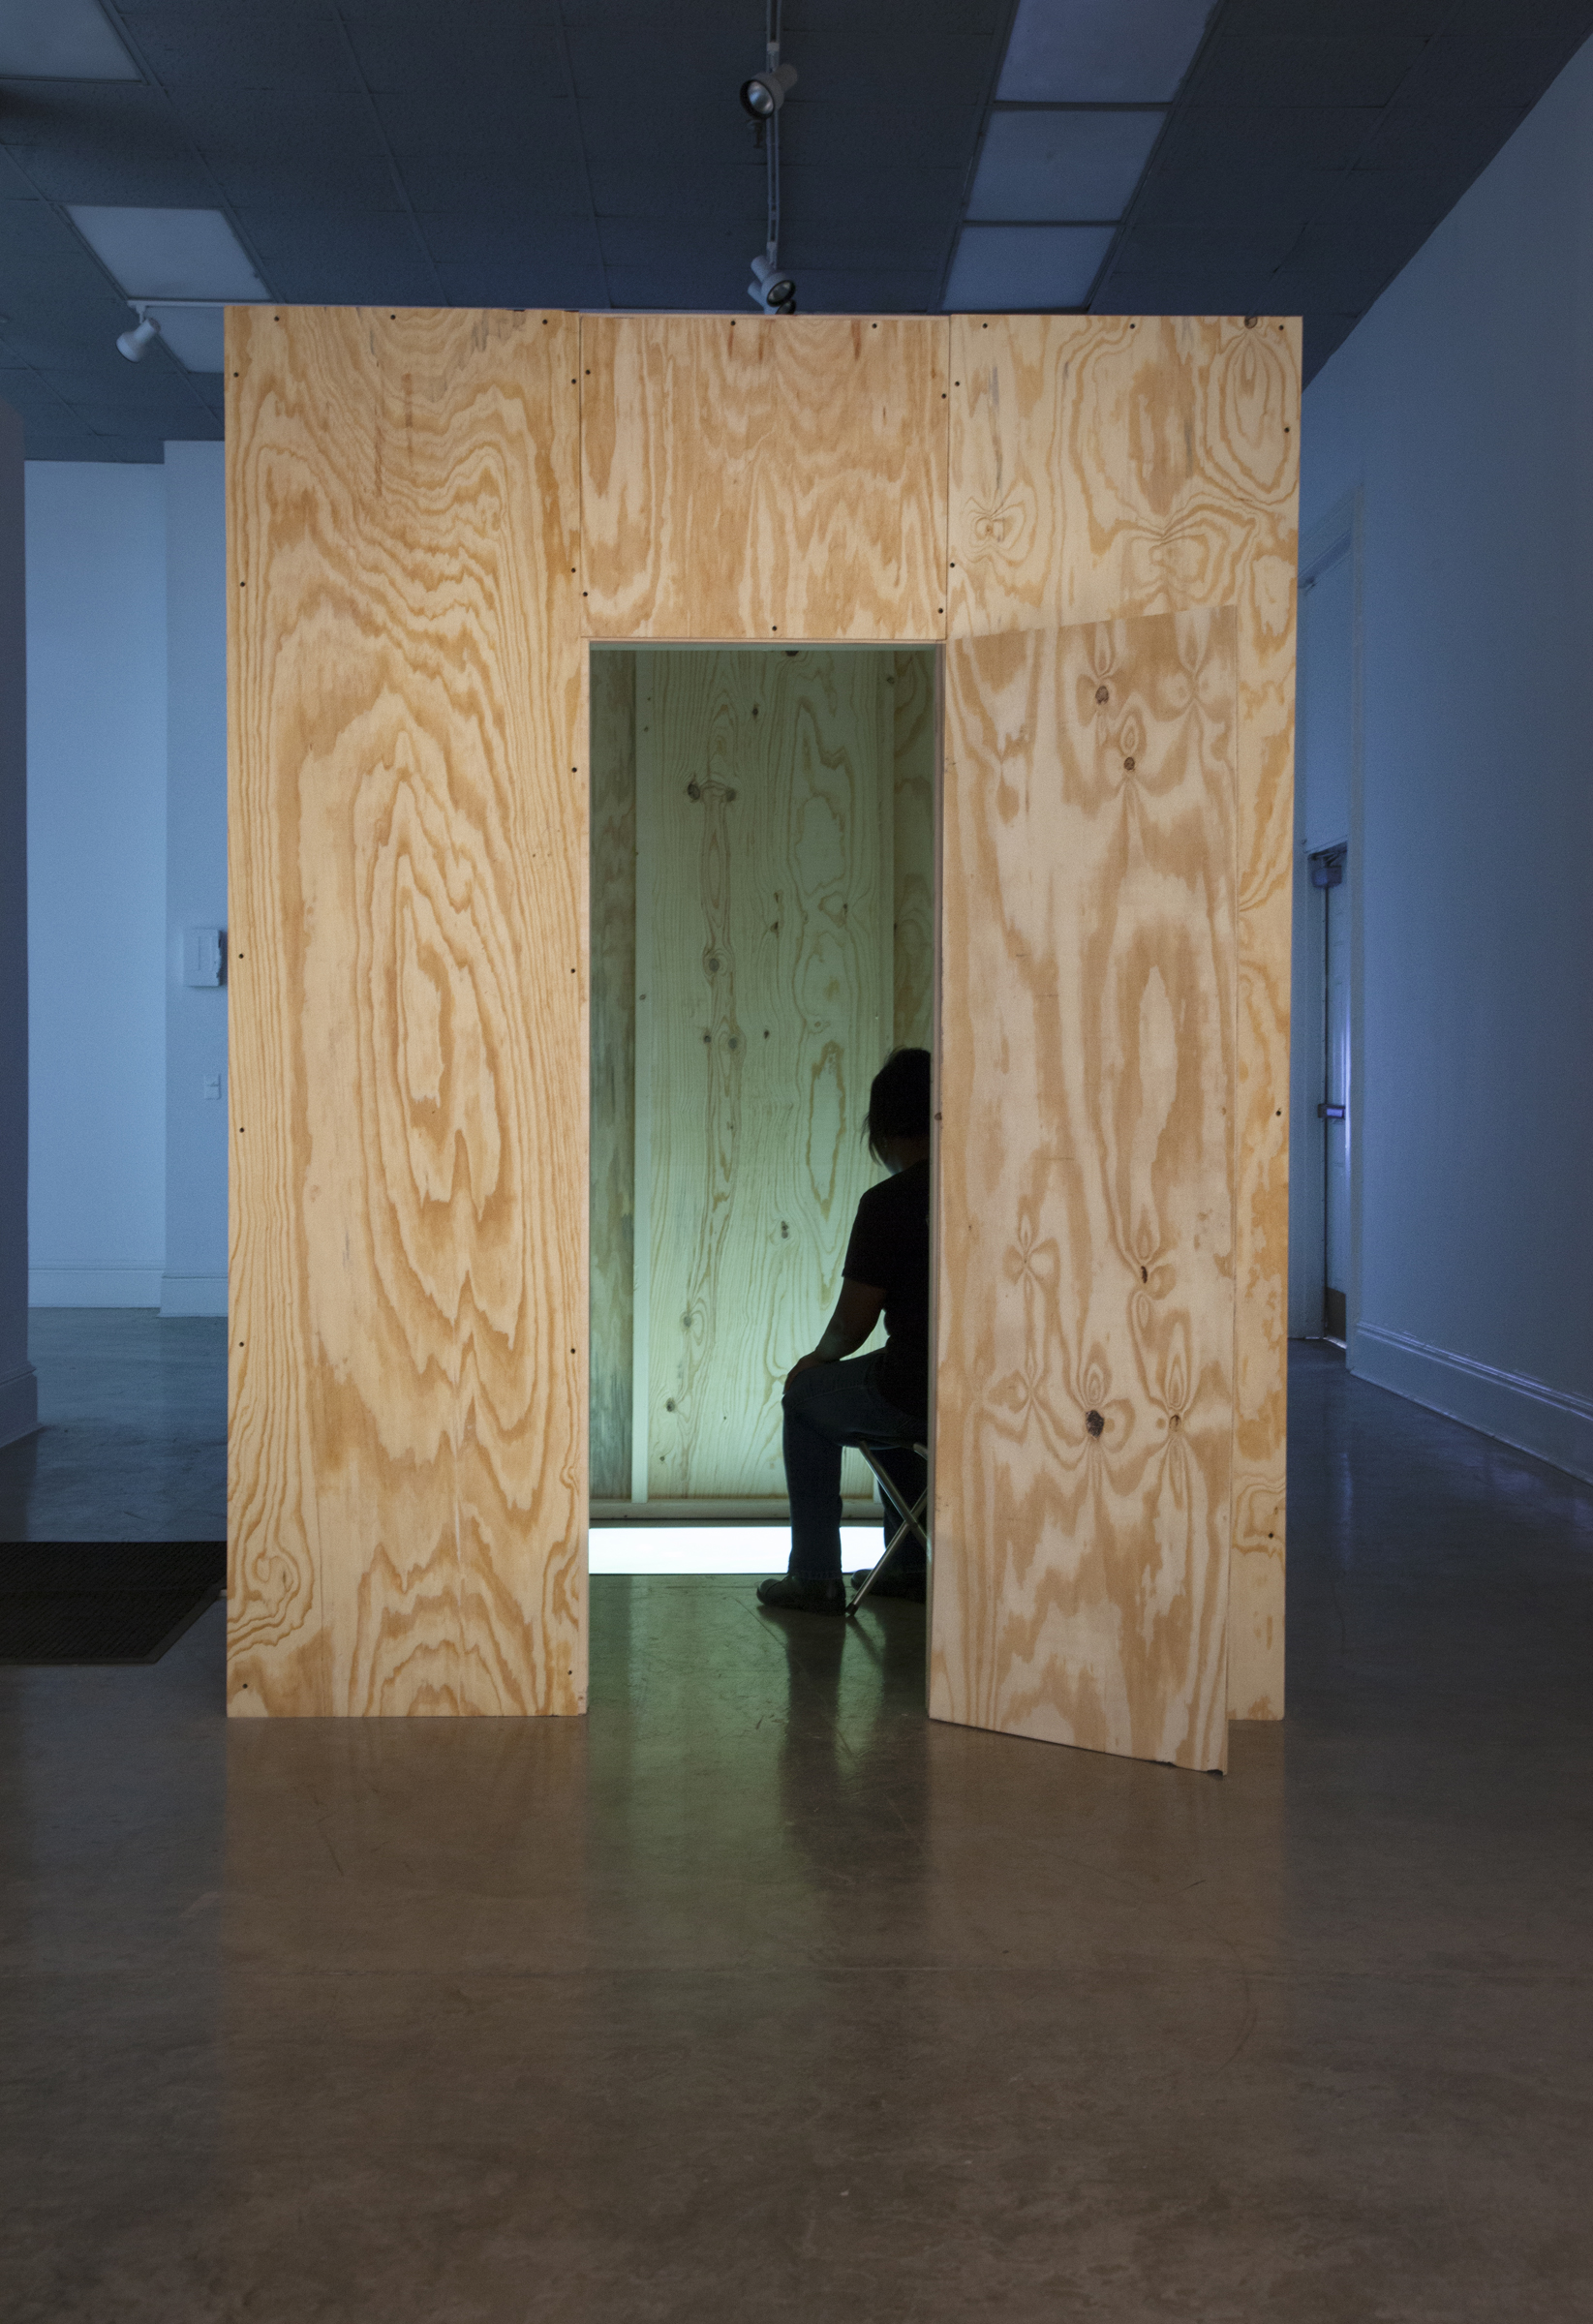 Installation view of Erin Colleen Johnson's video Hole.